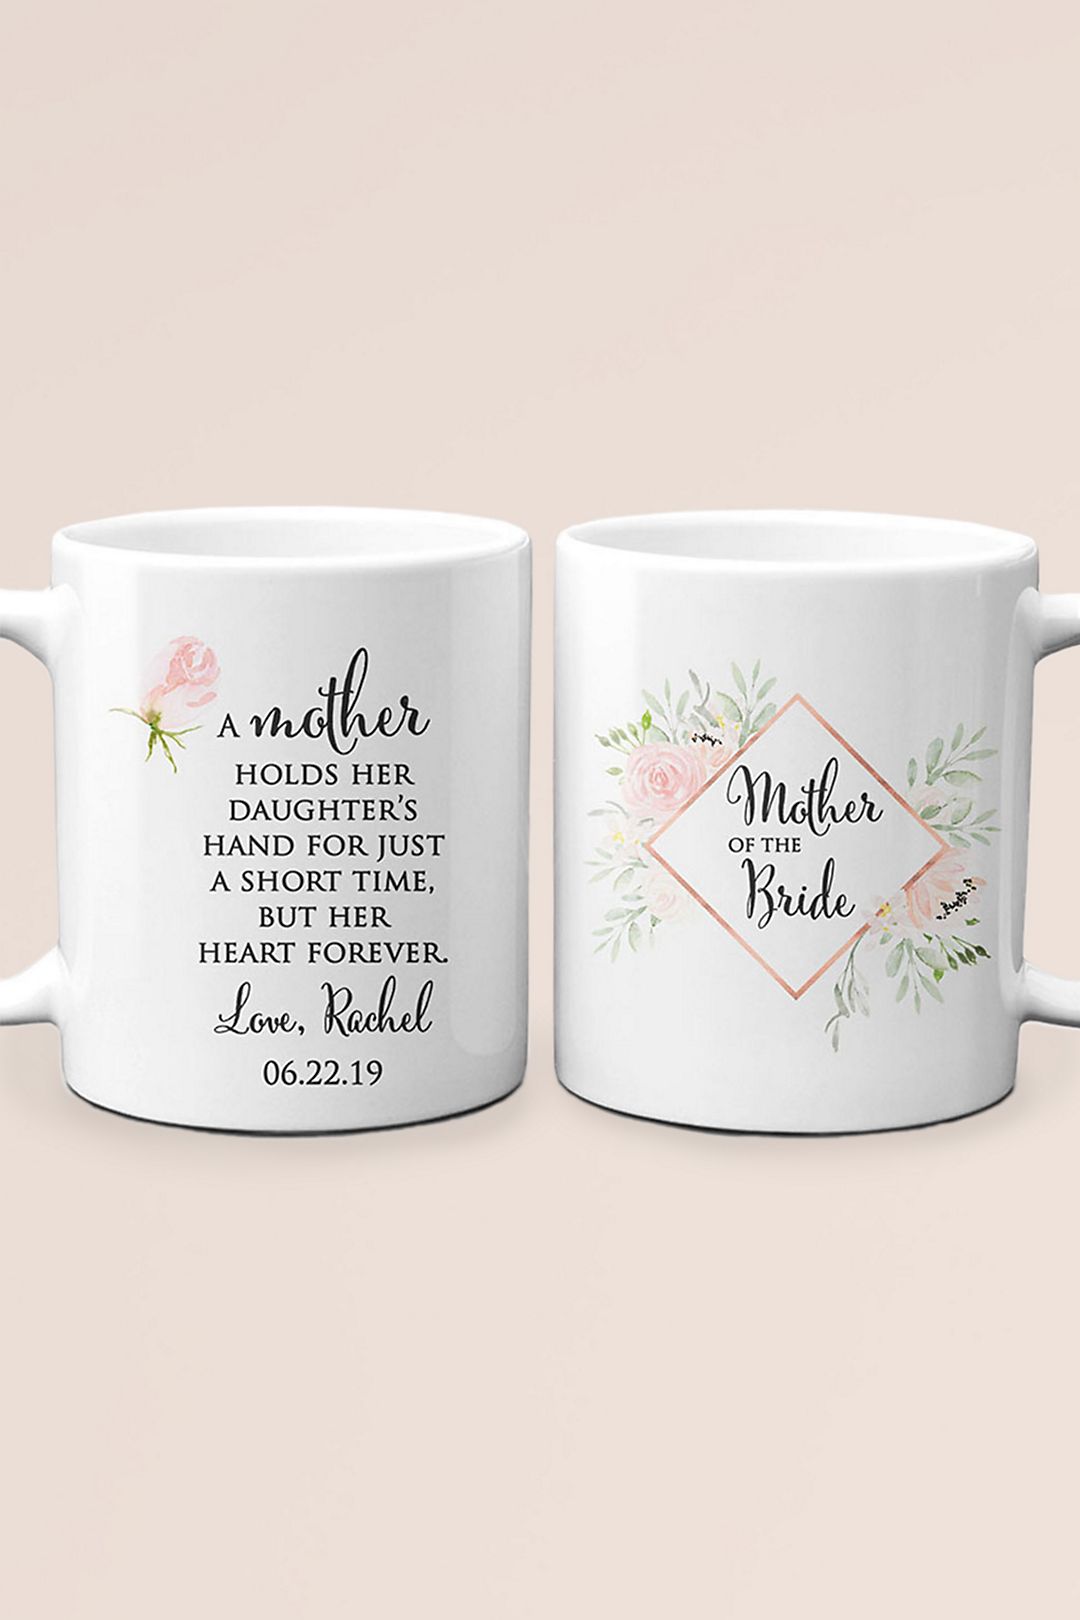 Personalized Mother of the Bride Thank You Mug Image 2